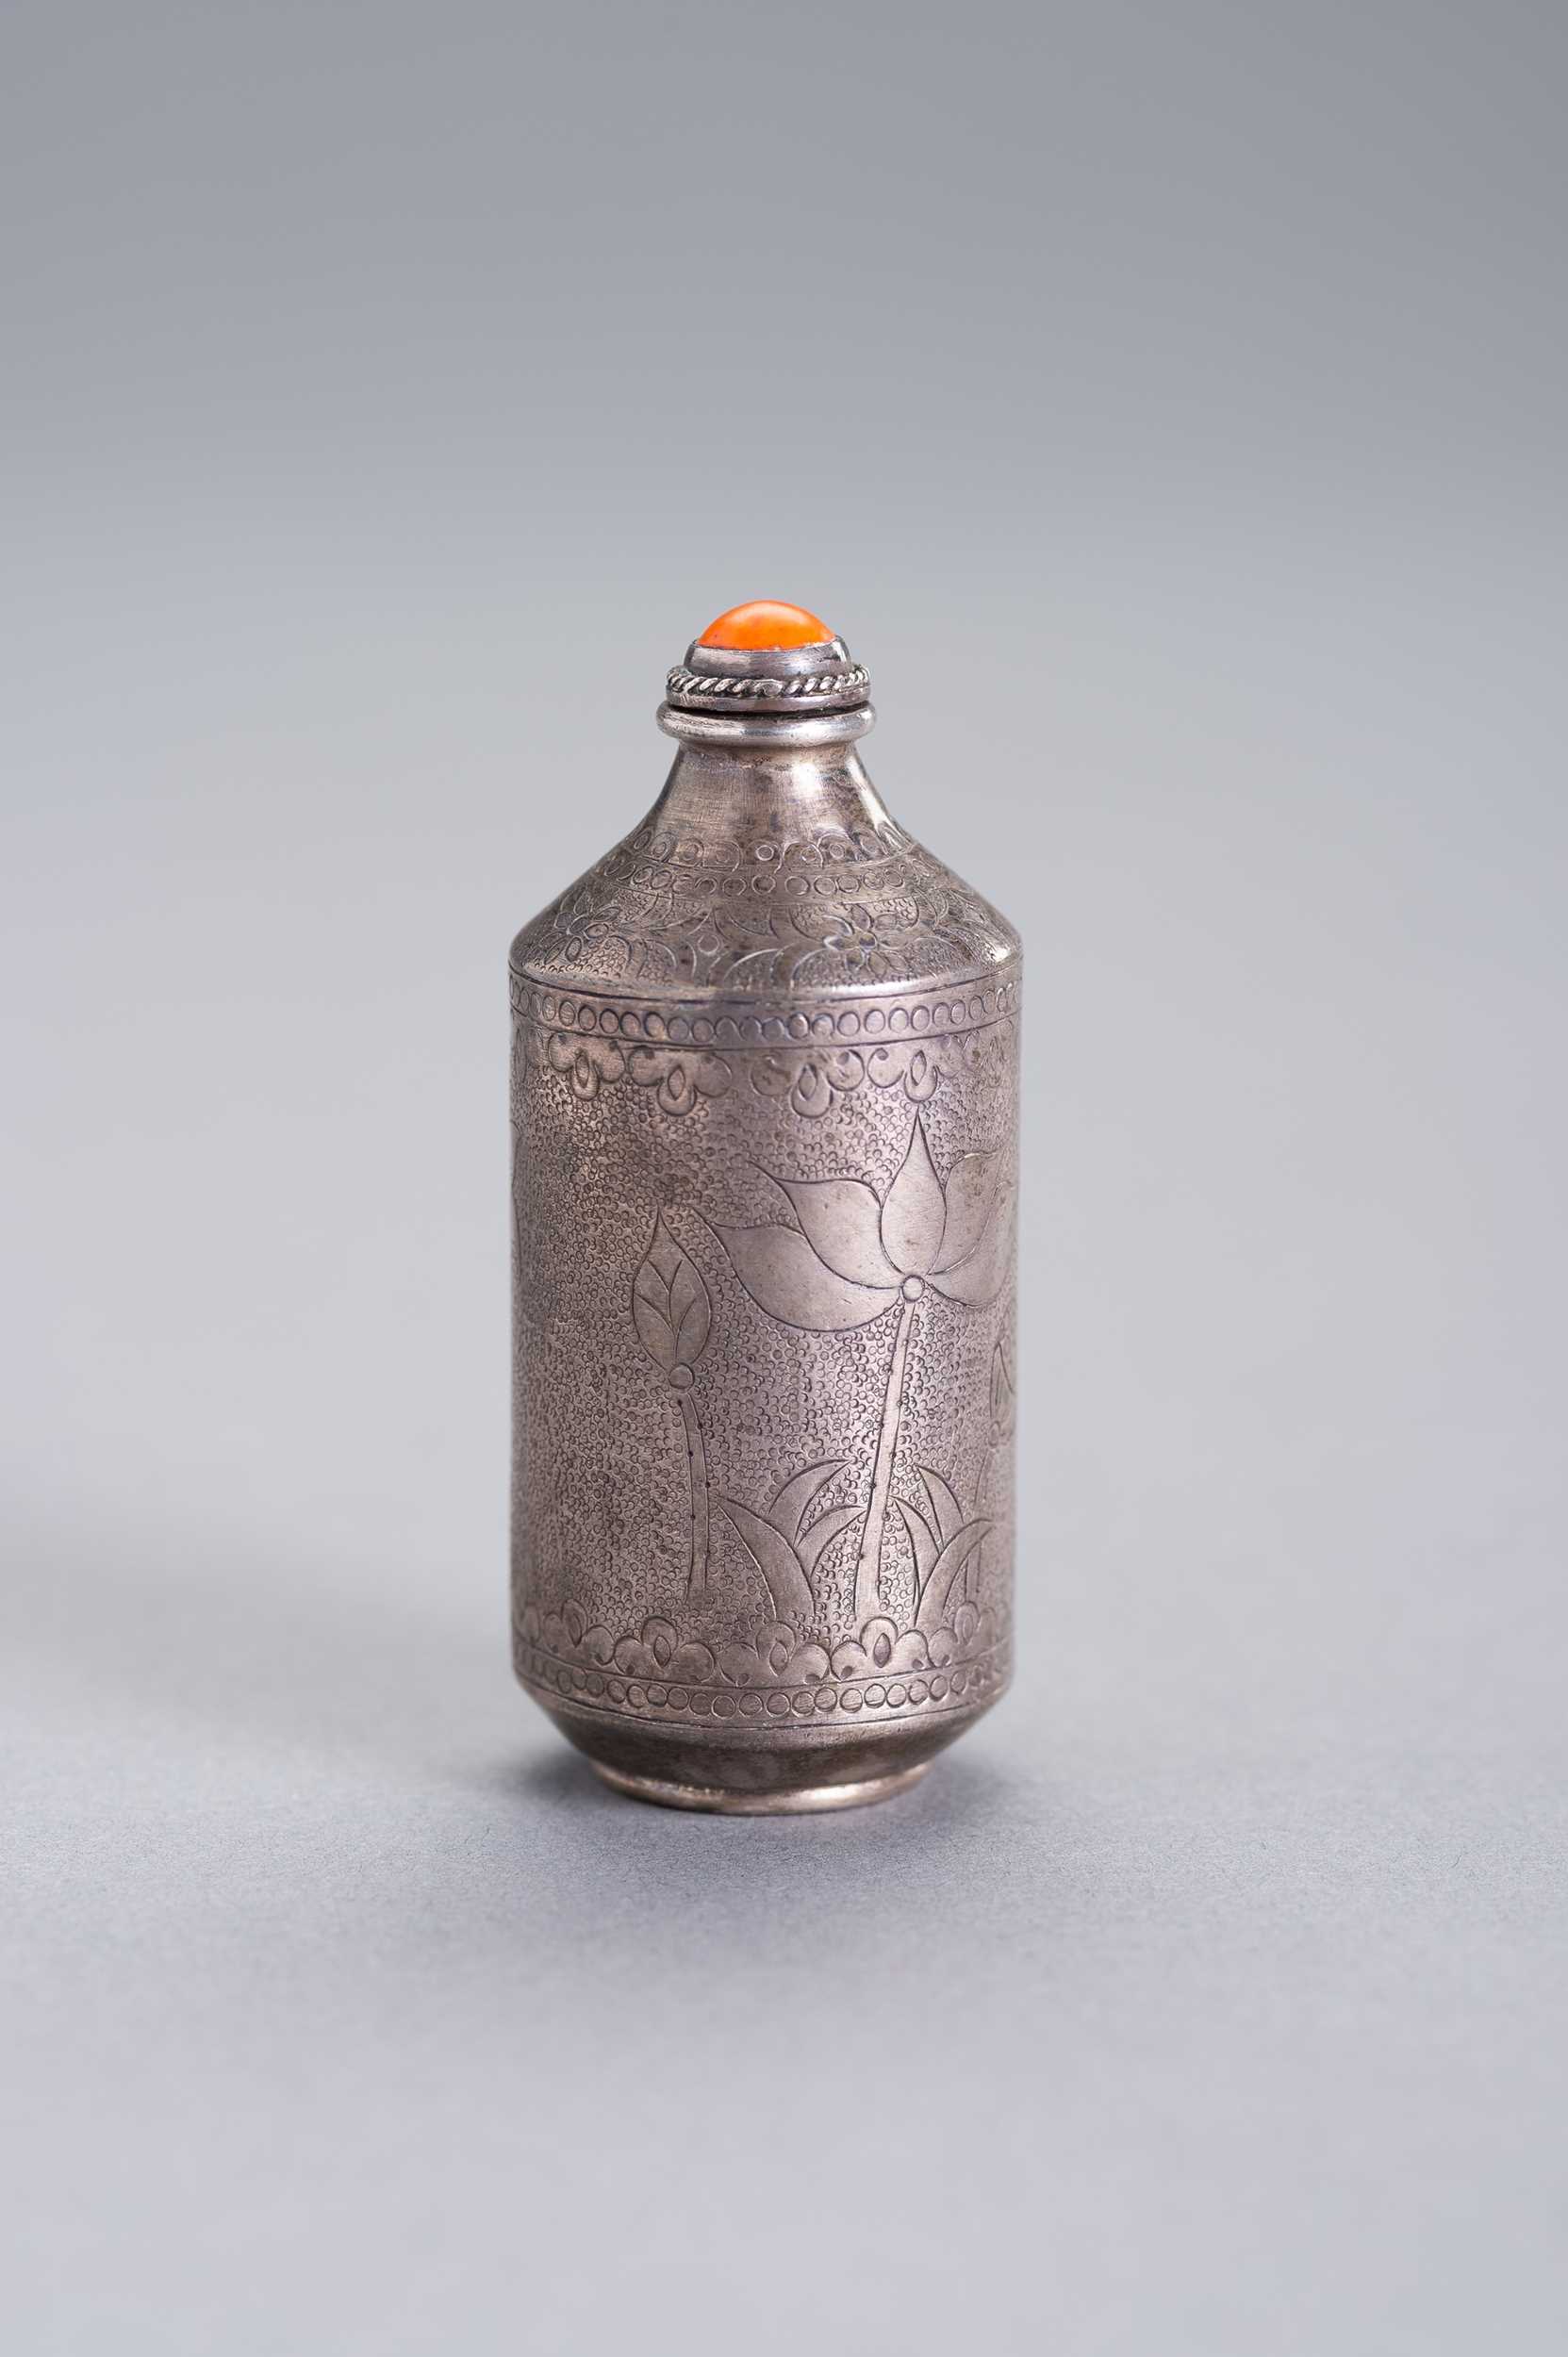 Lot 324 - AN INCISED SILVER SNUFF BOTTLE